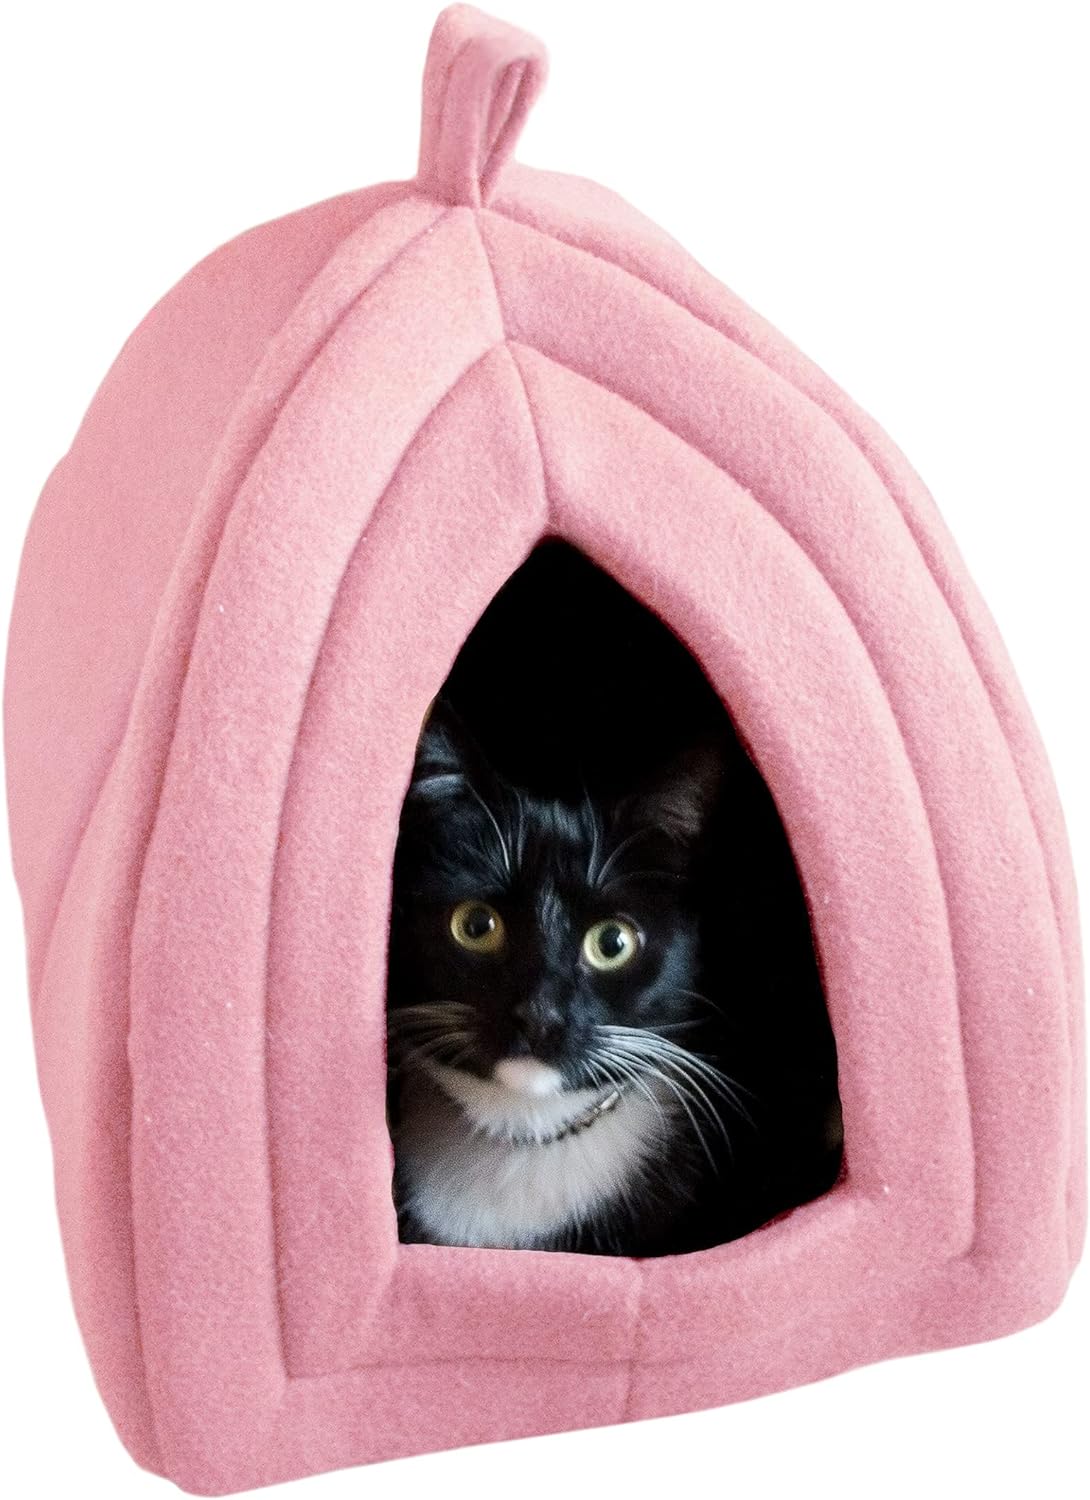 Petmaker Cat House - Indoor Bed with Removable Foam Cushion (Pink)